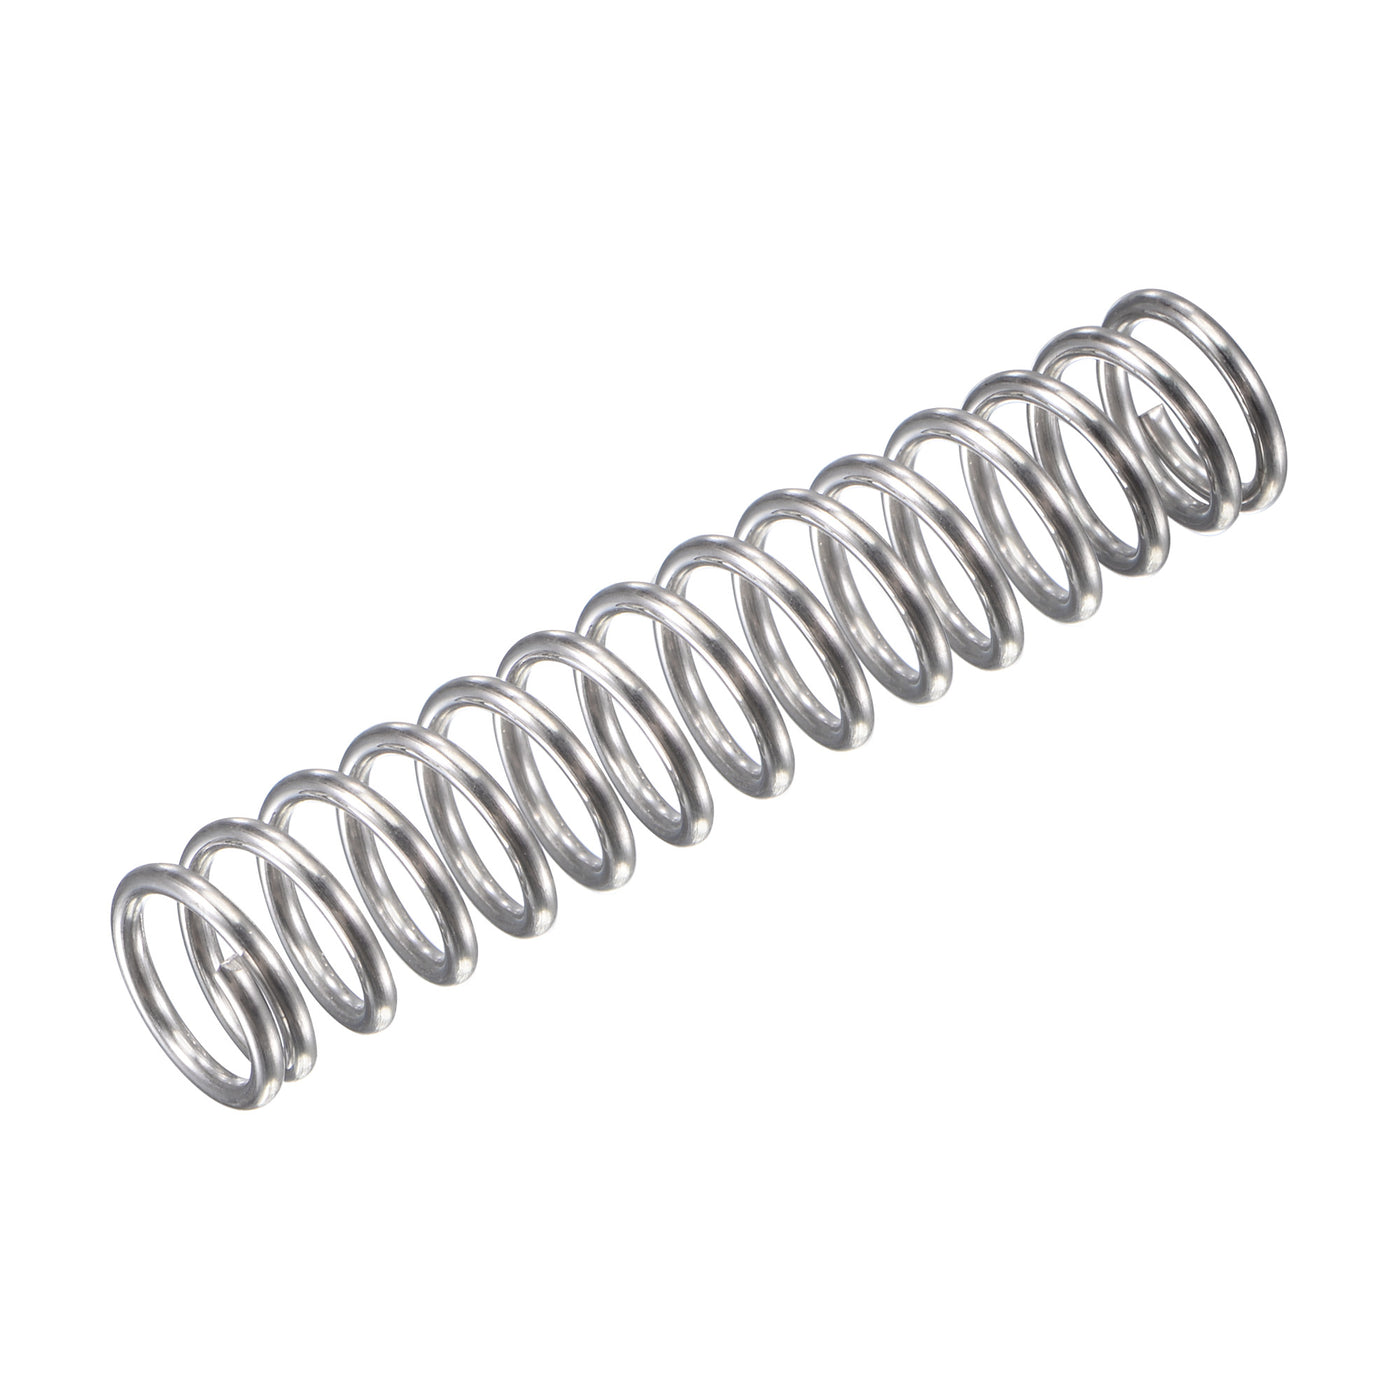 uxcell Uxcell 8mmx1mmx40mm 304 Stainless Steel Compression Spring 31.4N Load Capacity 5pcs